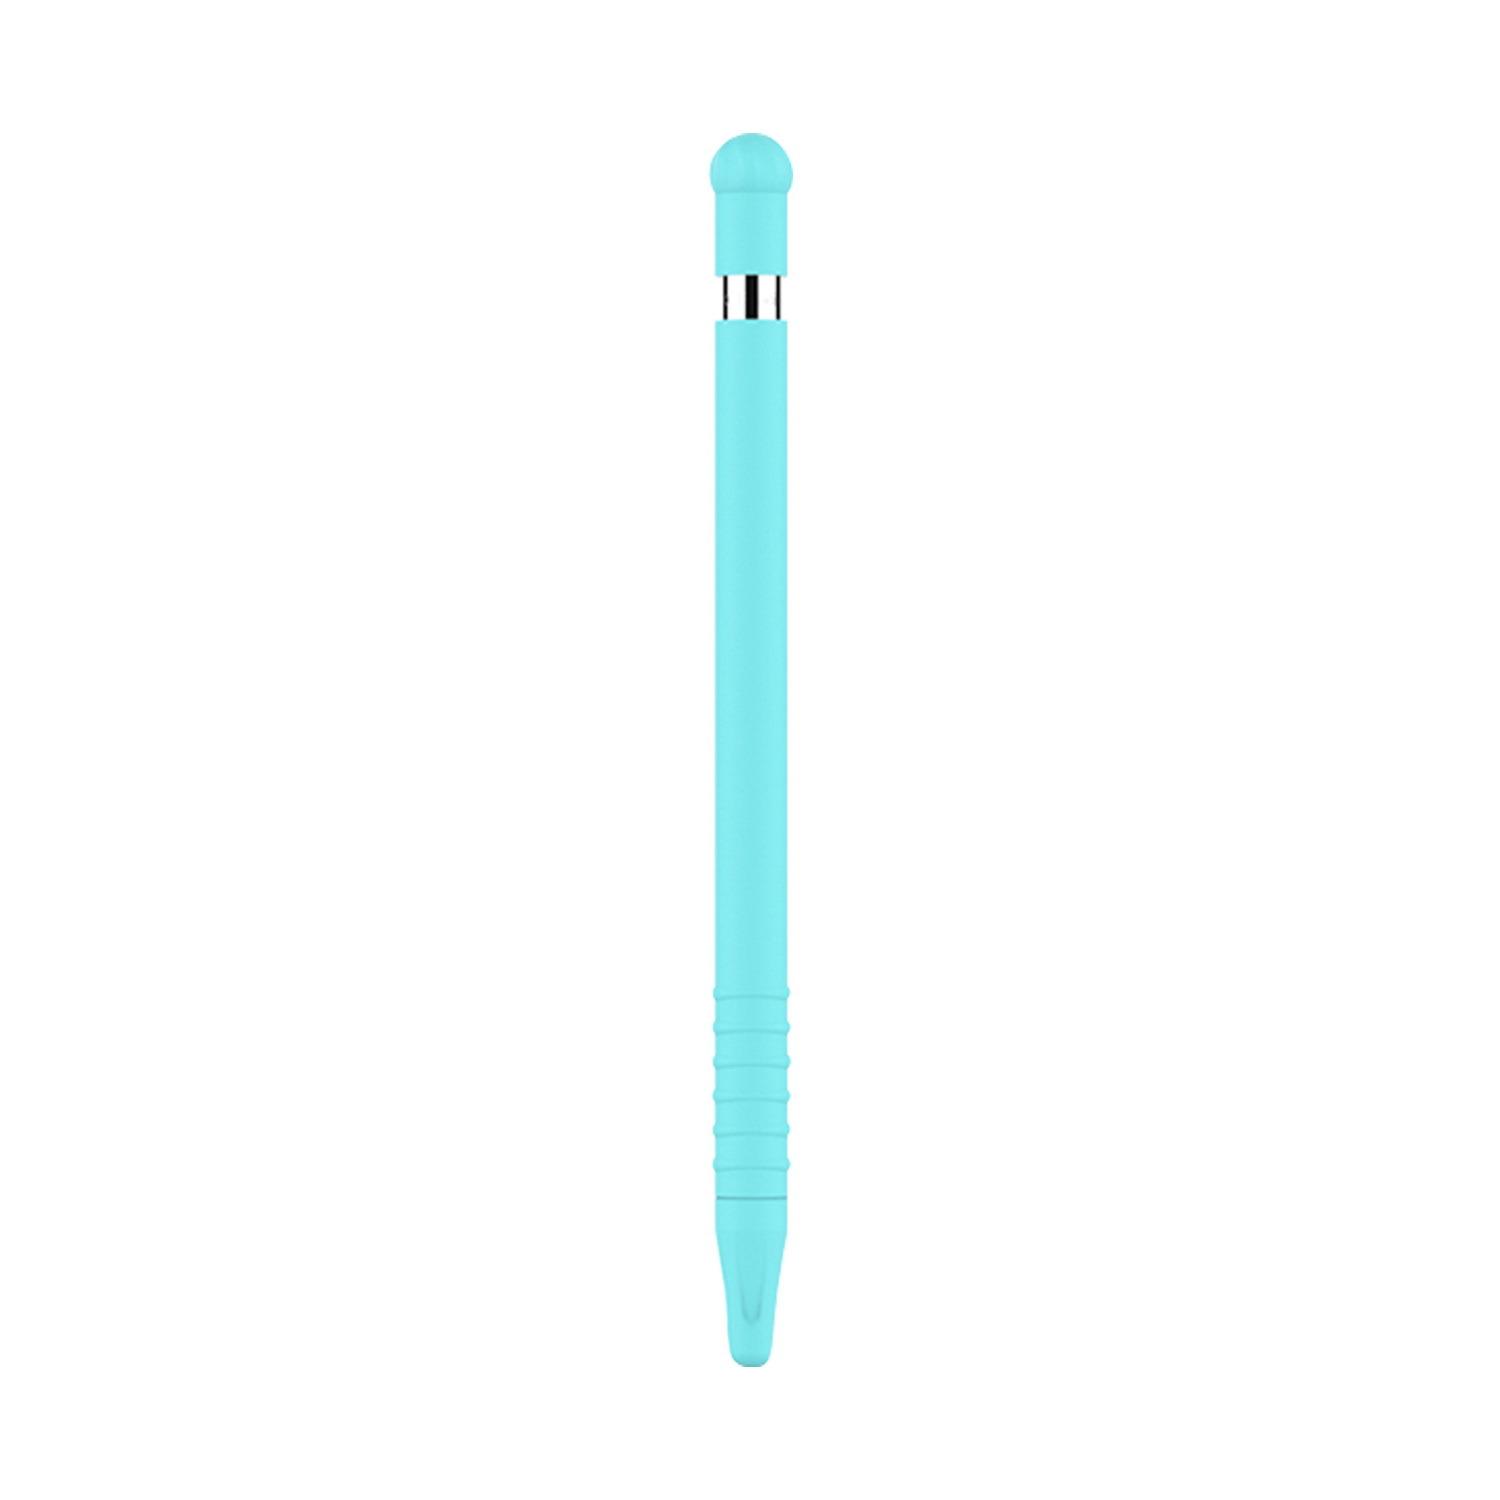 Heals Soft Silicone Case is for Apple Pencil 1st Gen